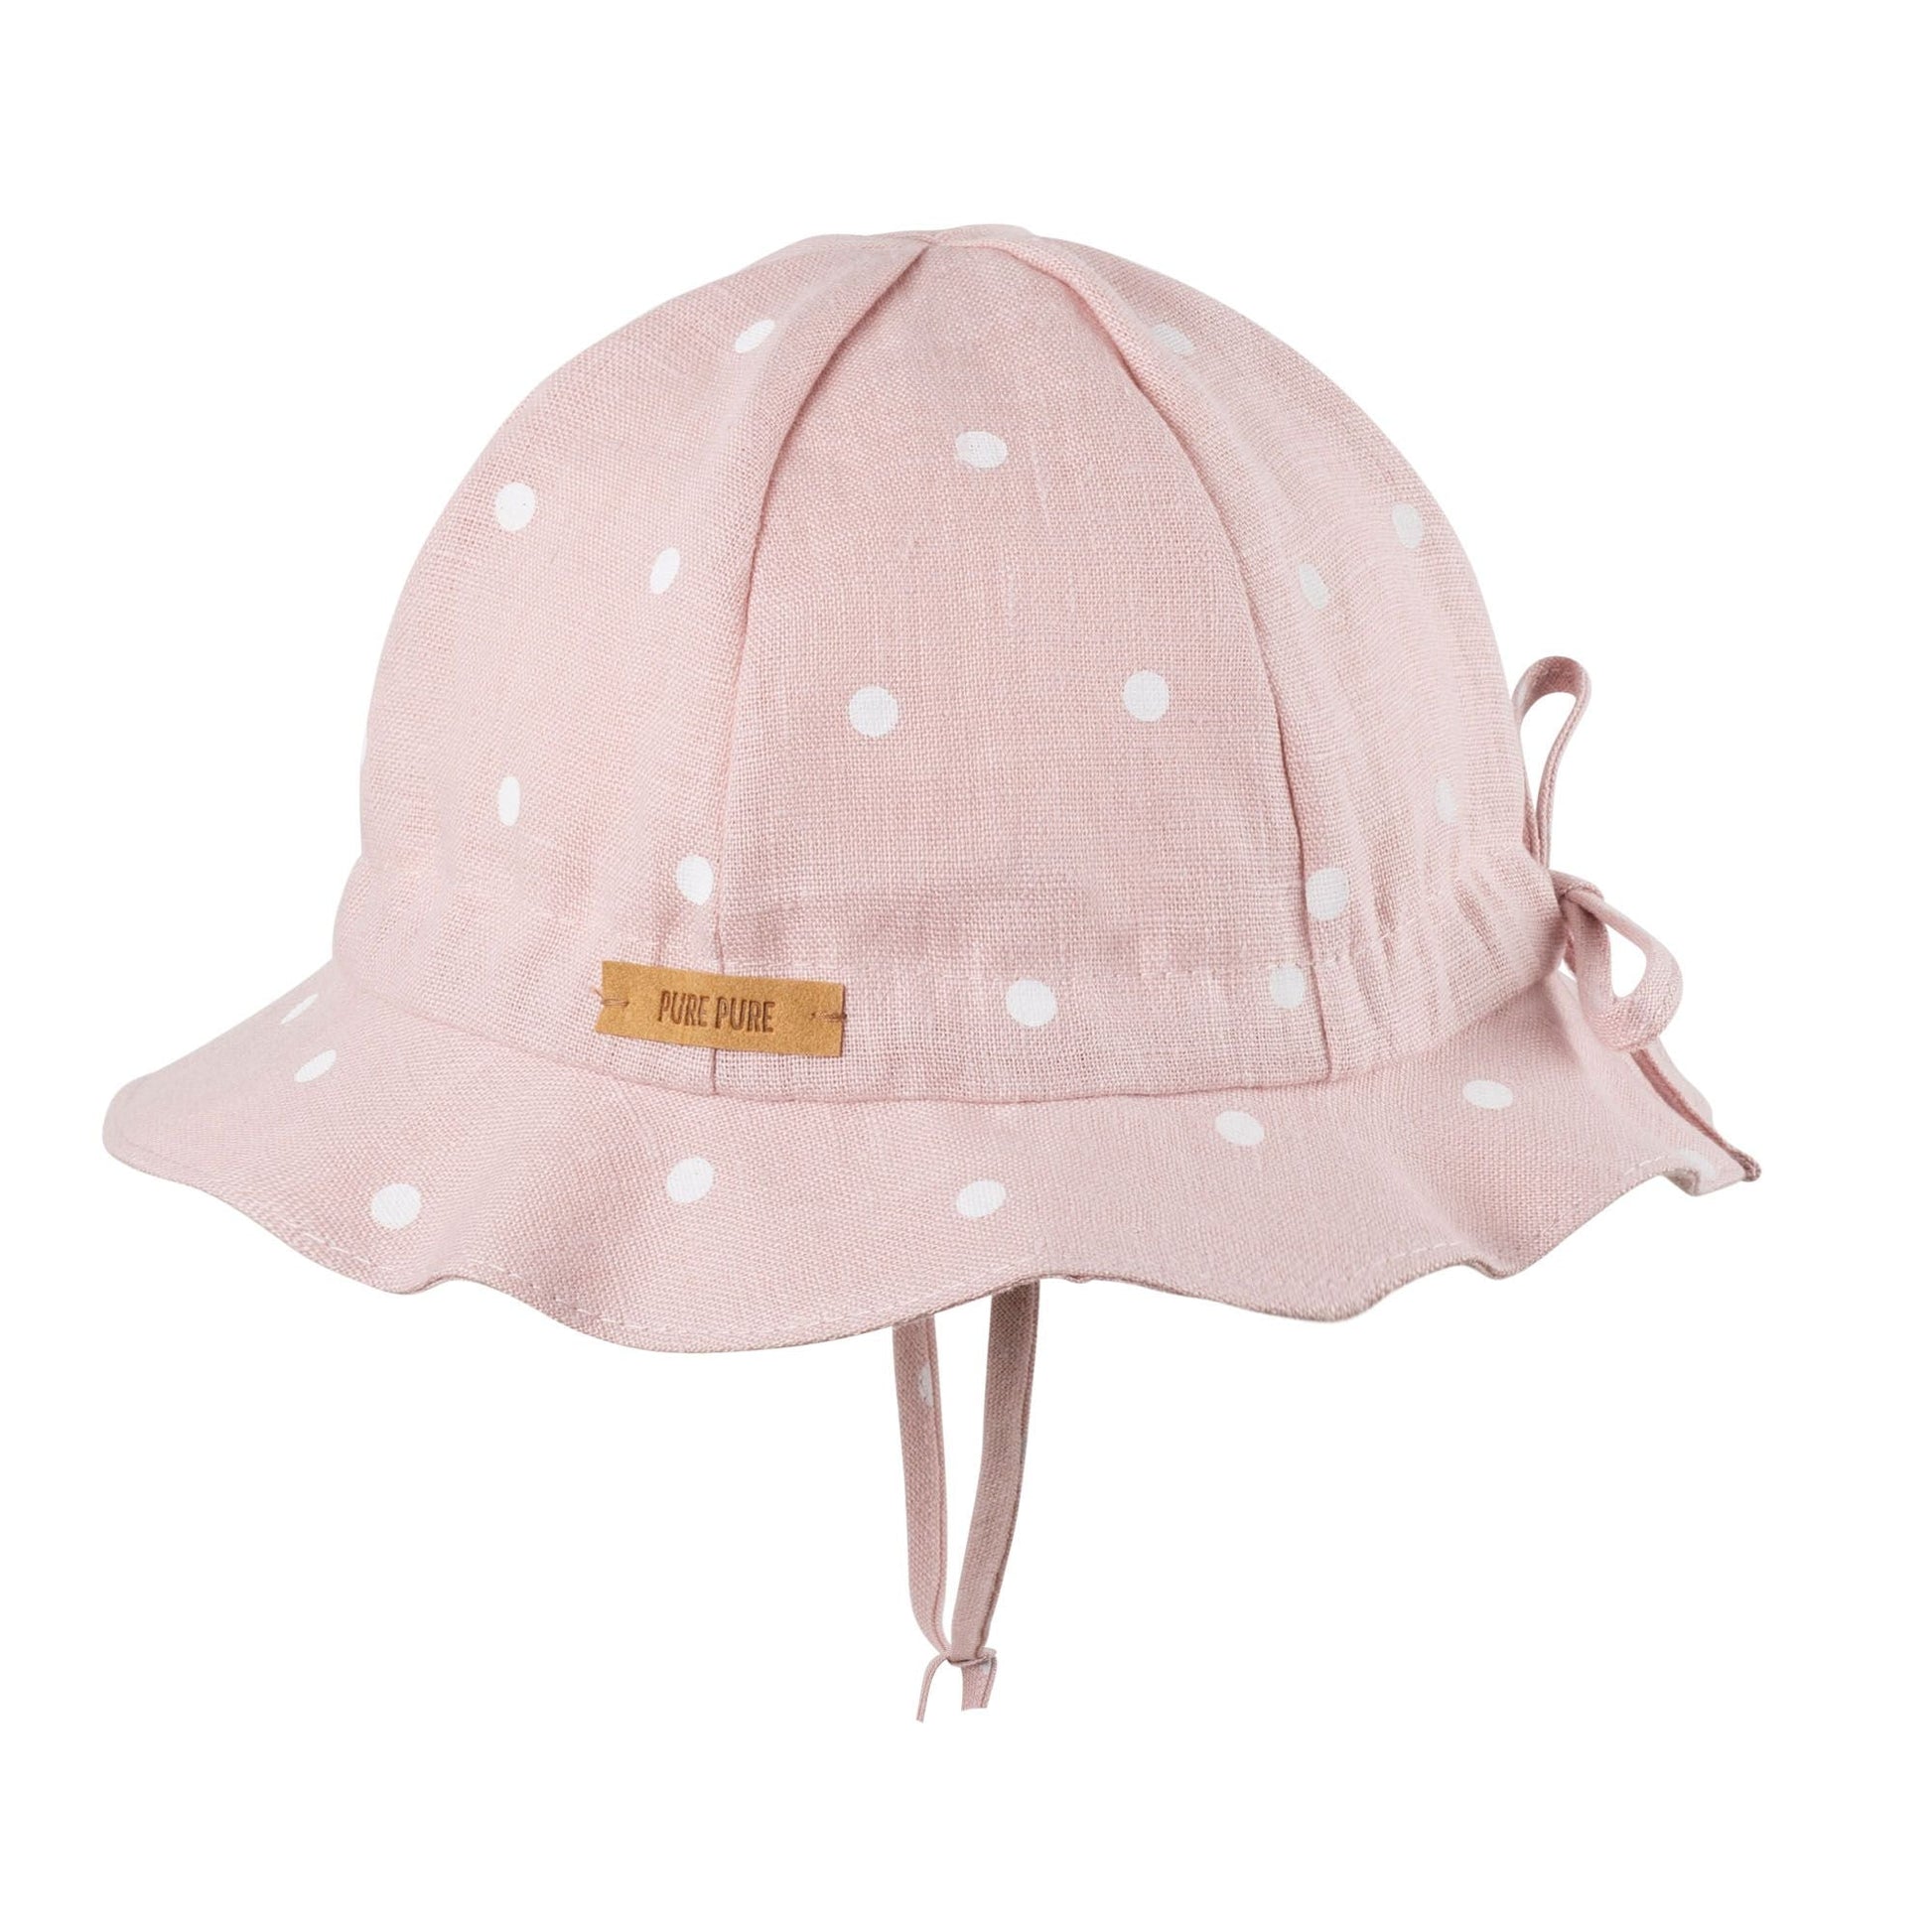 Linen Sun Hat - Baby and Toddler - Bucket Hat (2 colors) - Nature's Wild Child